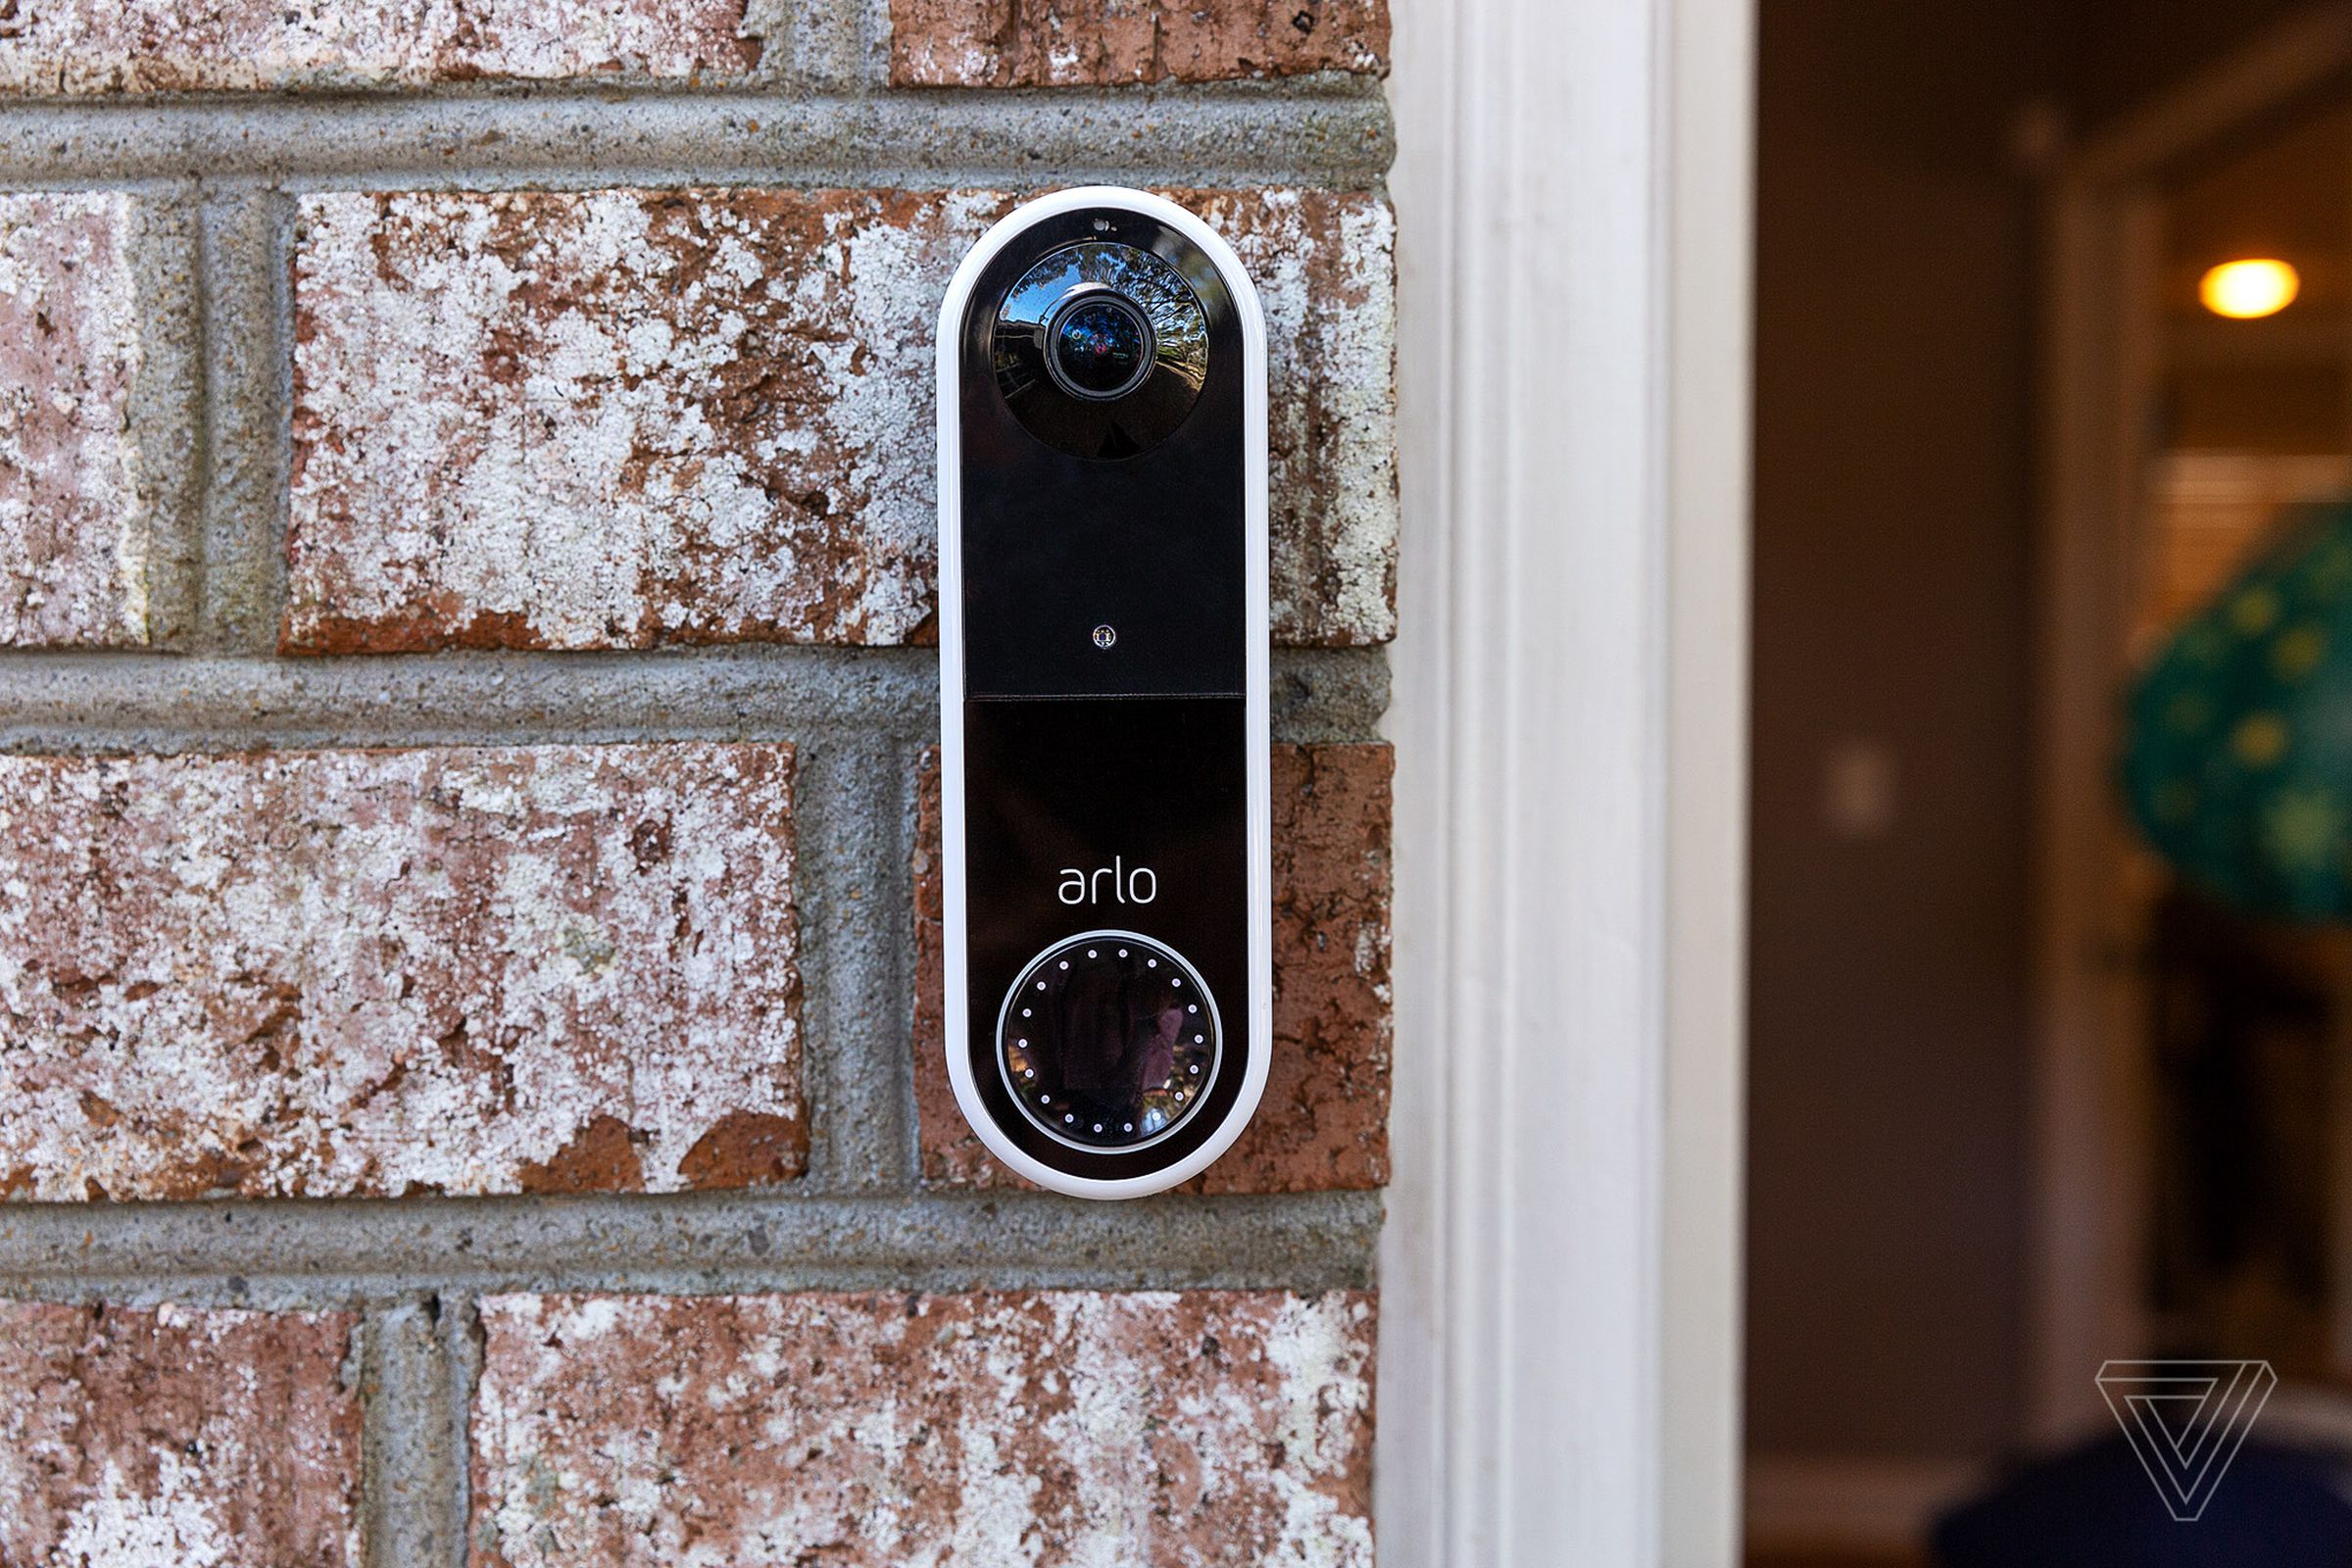 The white version of the Arlo wire-free video doorbell is currently selling for less than the black model, which is also discounted.